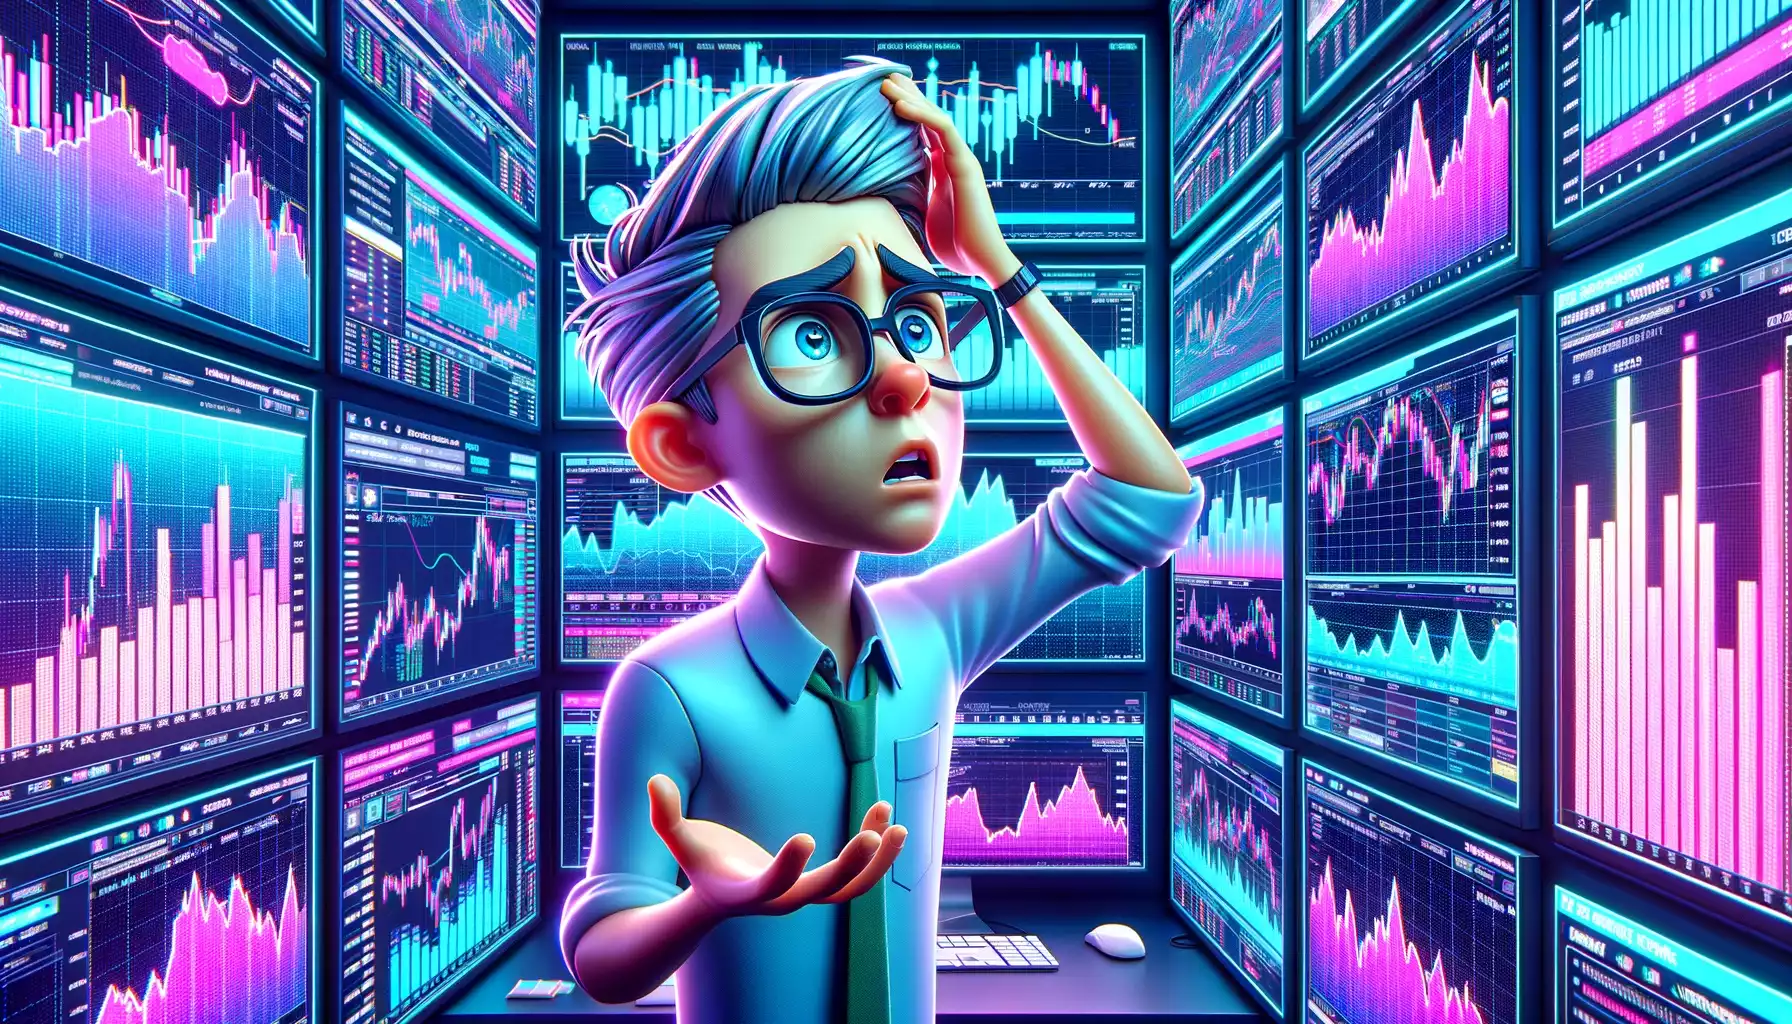 Cartoon-style 3D trader looking confused at screens, neon office backdrop.